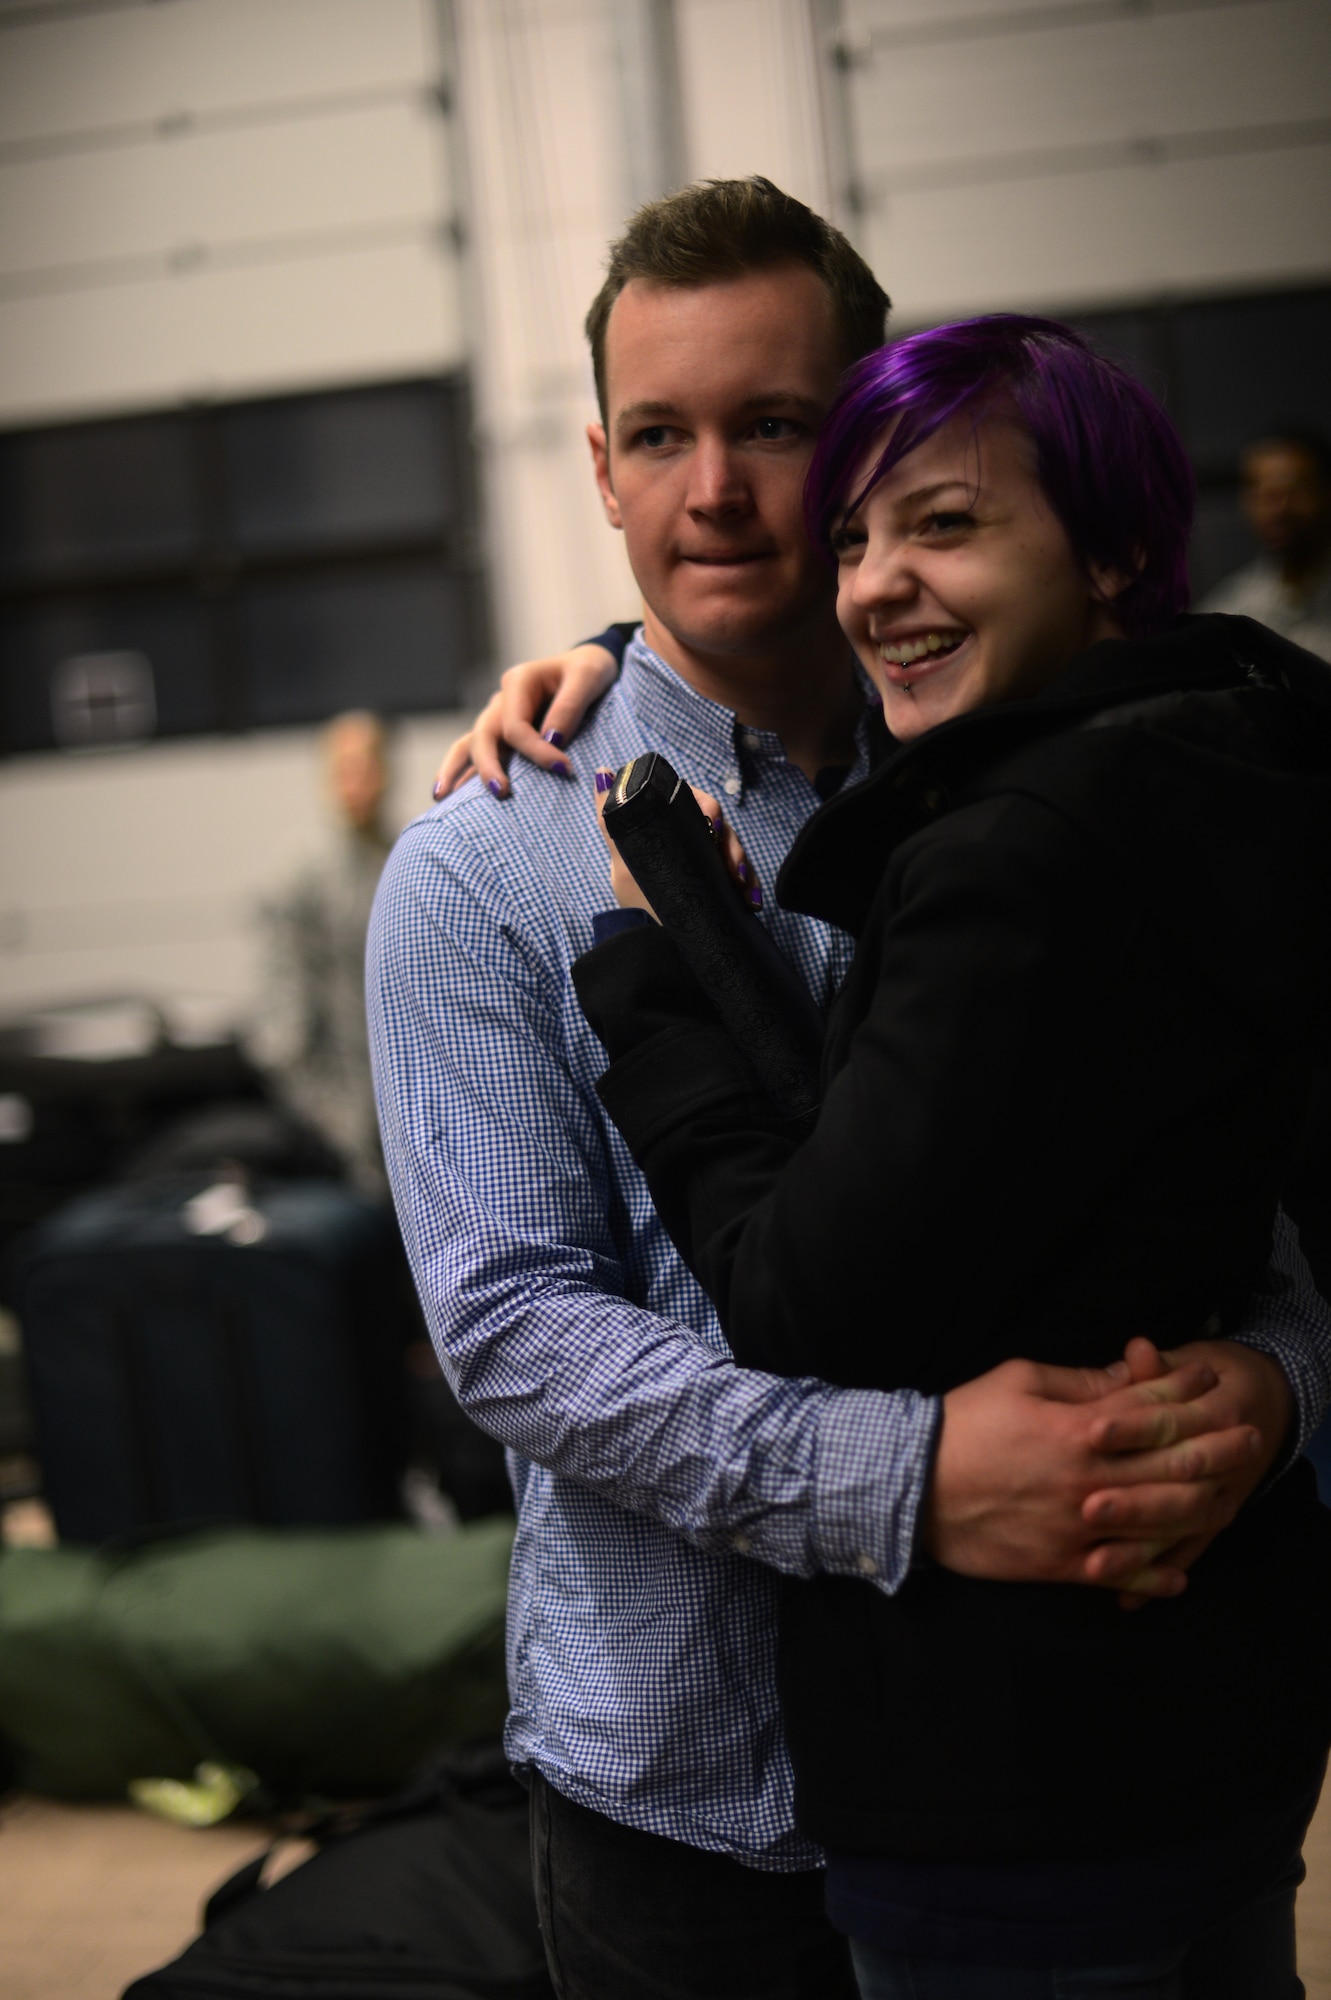 U.S. Air Force Senior Airman Julian Chesser, a 606th Air Control Squadron interface control technician and native of Prattville, Ala., left, embraces his fiancée, Kessia Unger, on Spangdahlem Air Base, Germany, Oct. 7, 2014, before departing for a deployment to an undisclosed location in Southwest Asia. More than 300 friends, family and members of the 606th ACS gathered to see off their loved ones. (U.S. Air Force photo by Senior Airman Gustavo Castillo/Released)